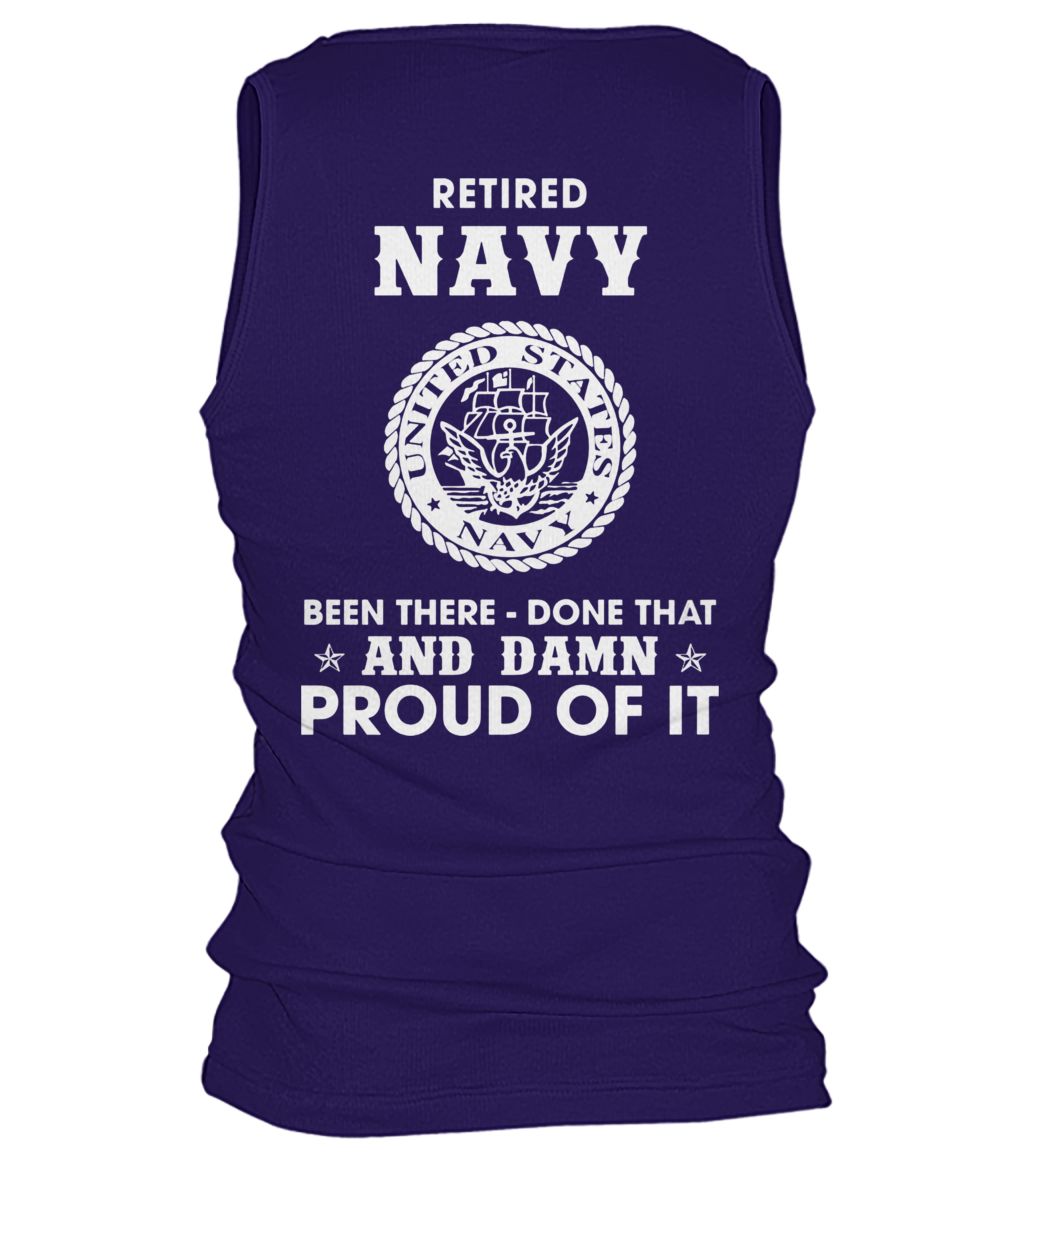 Retired navy been there done that and damn proud of it men's tank top